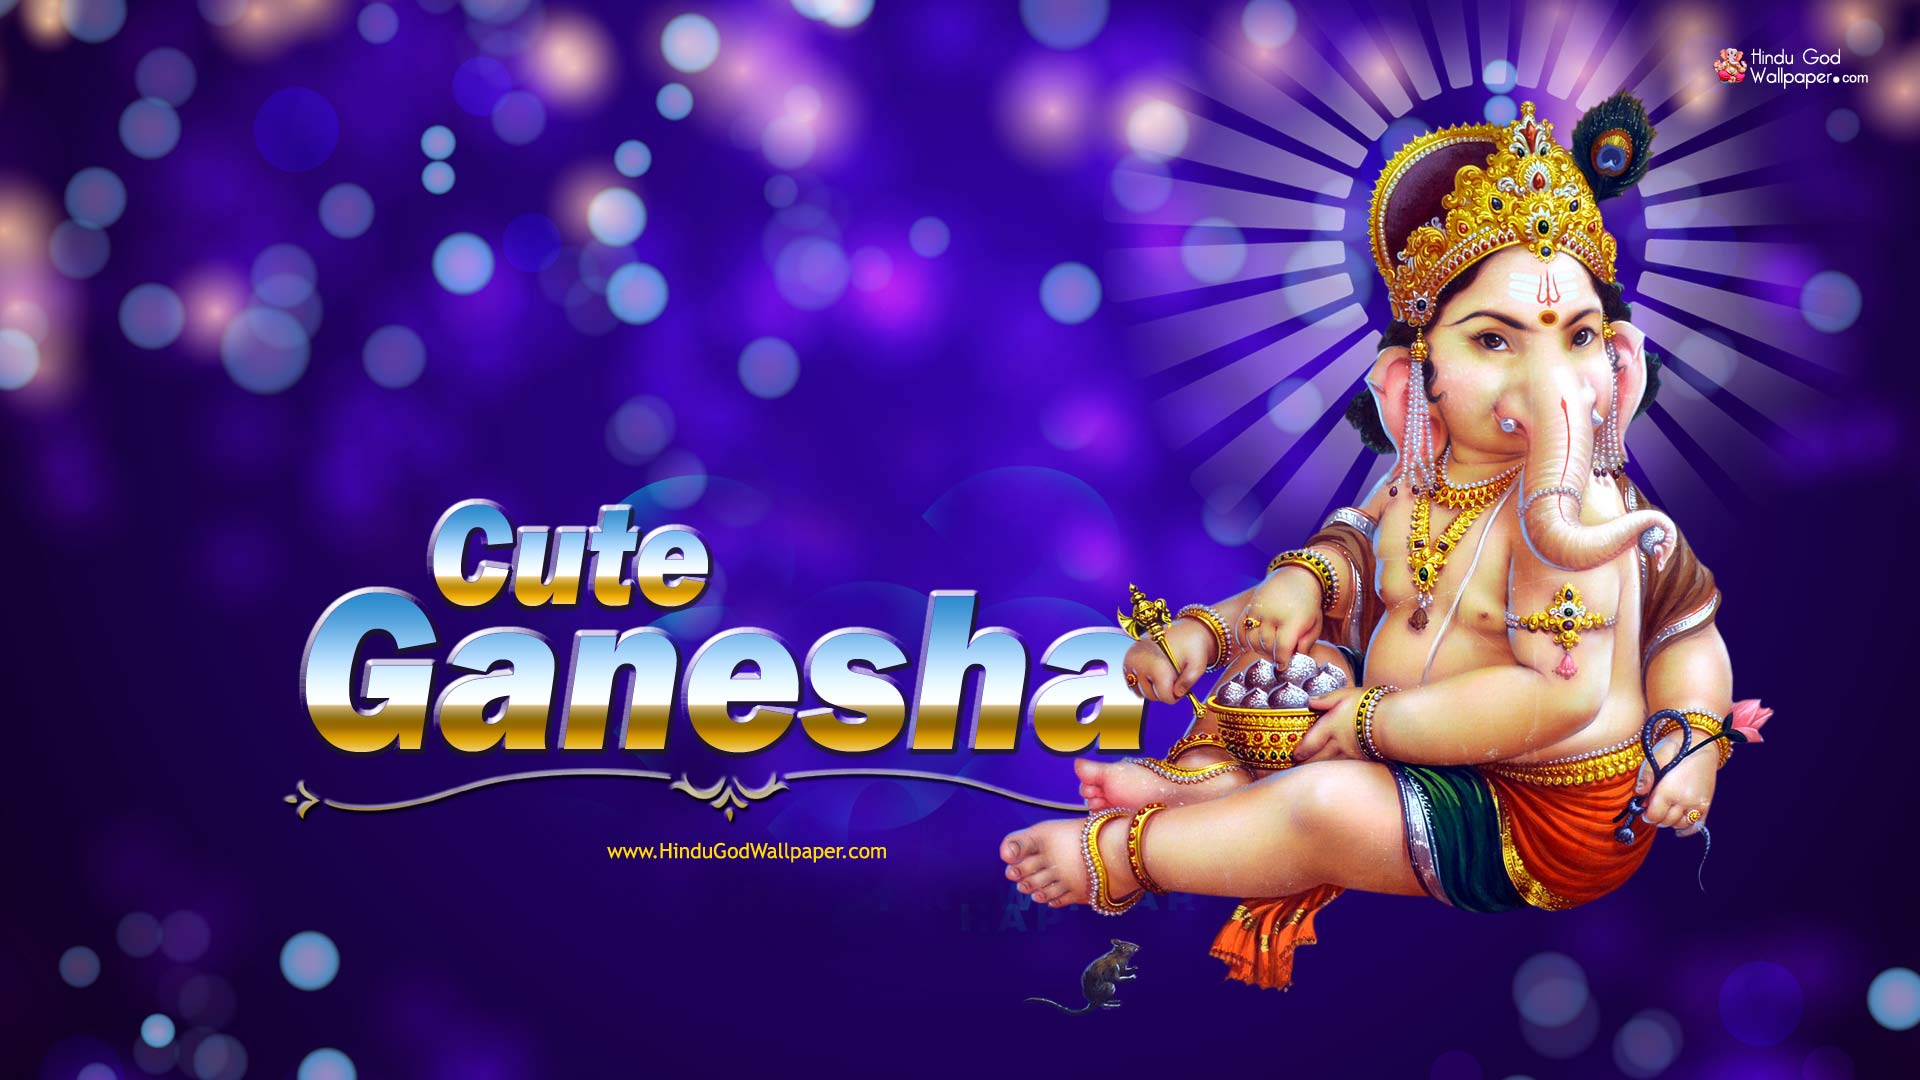 Bal Ganesh Wallpapers, HD Images, Photos, Pictures Free Download